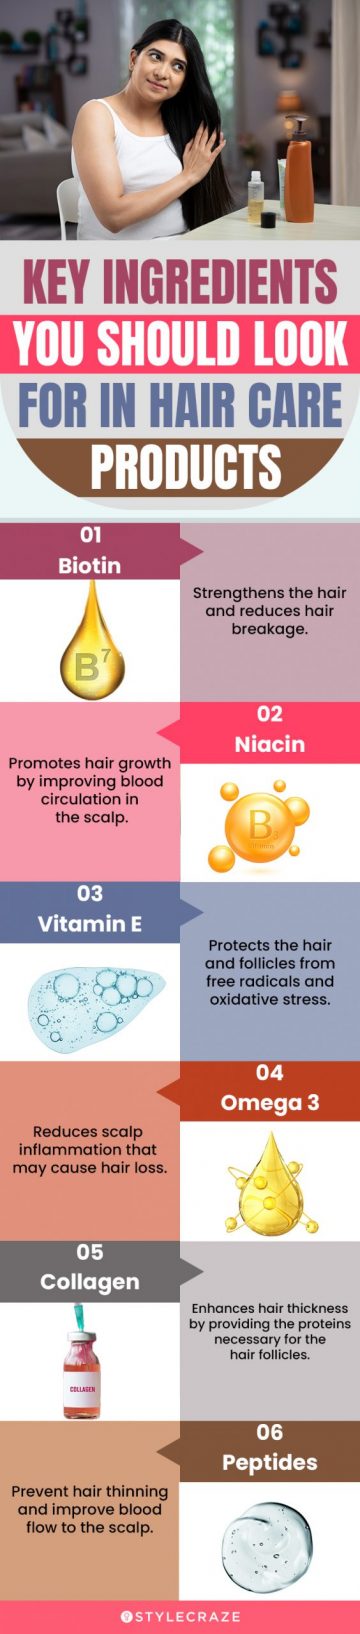 Key Ingredients You Should Look For In Hair Care Products (infographic)